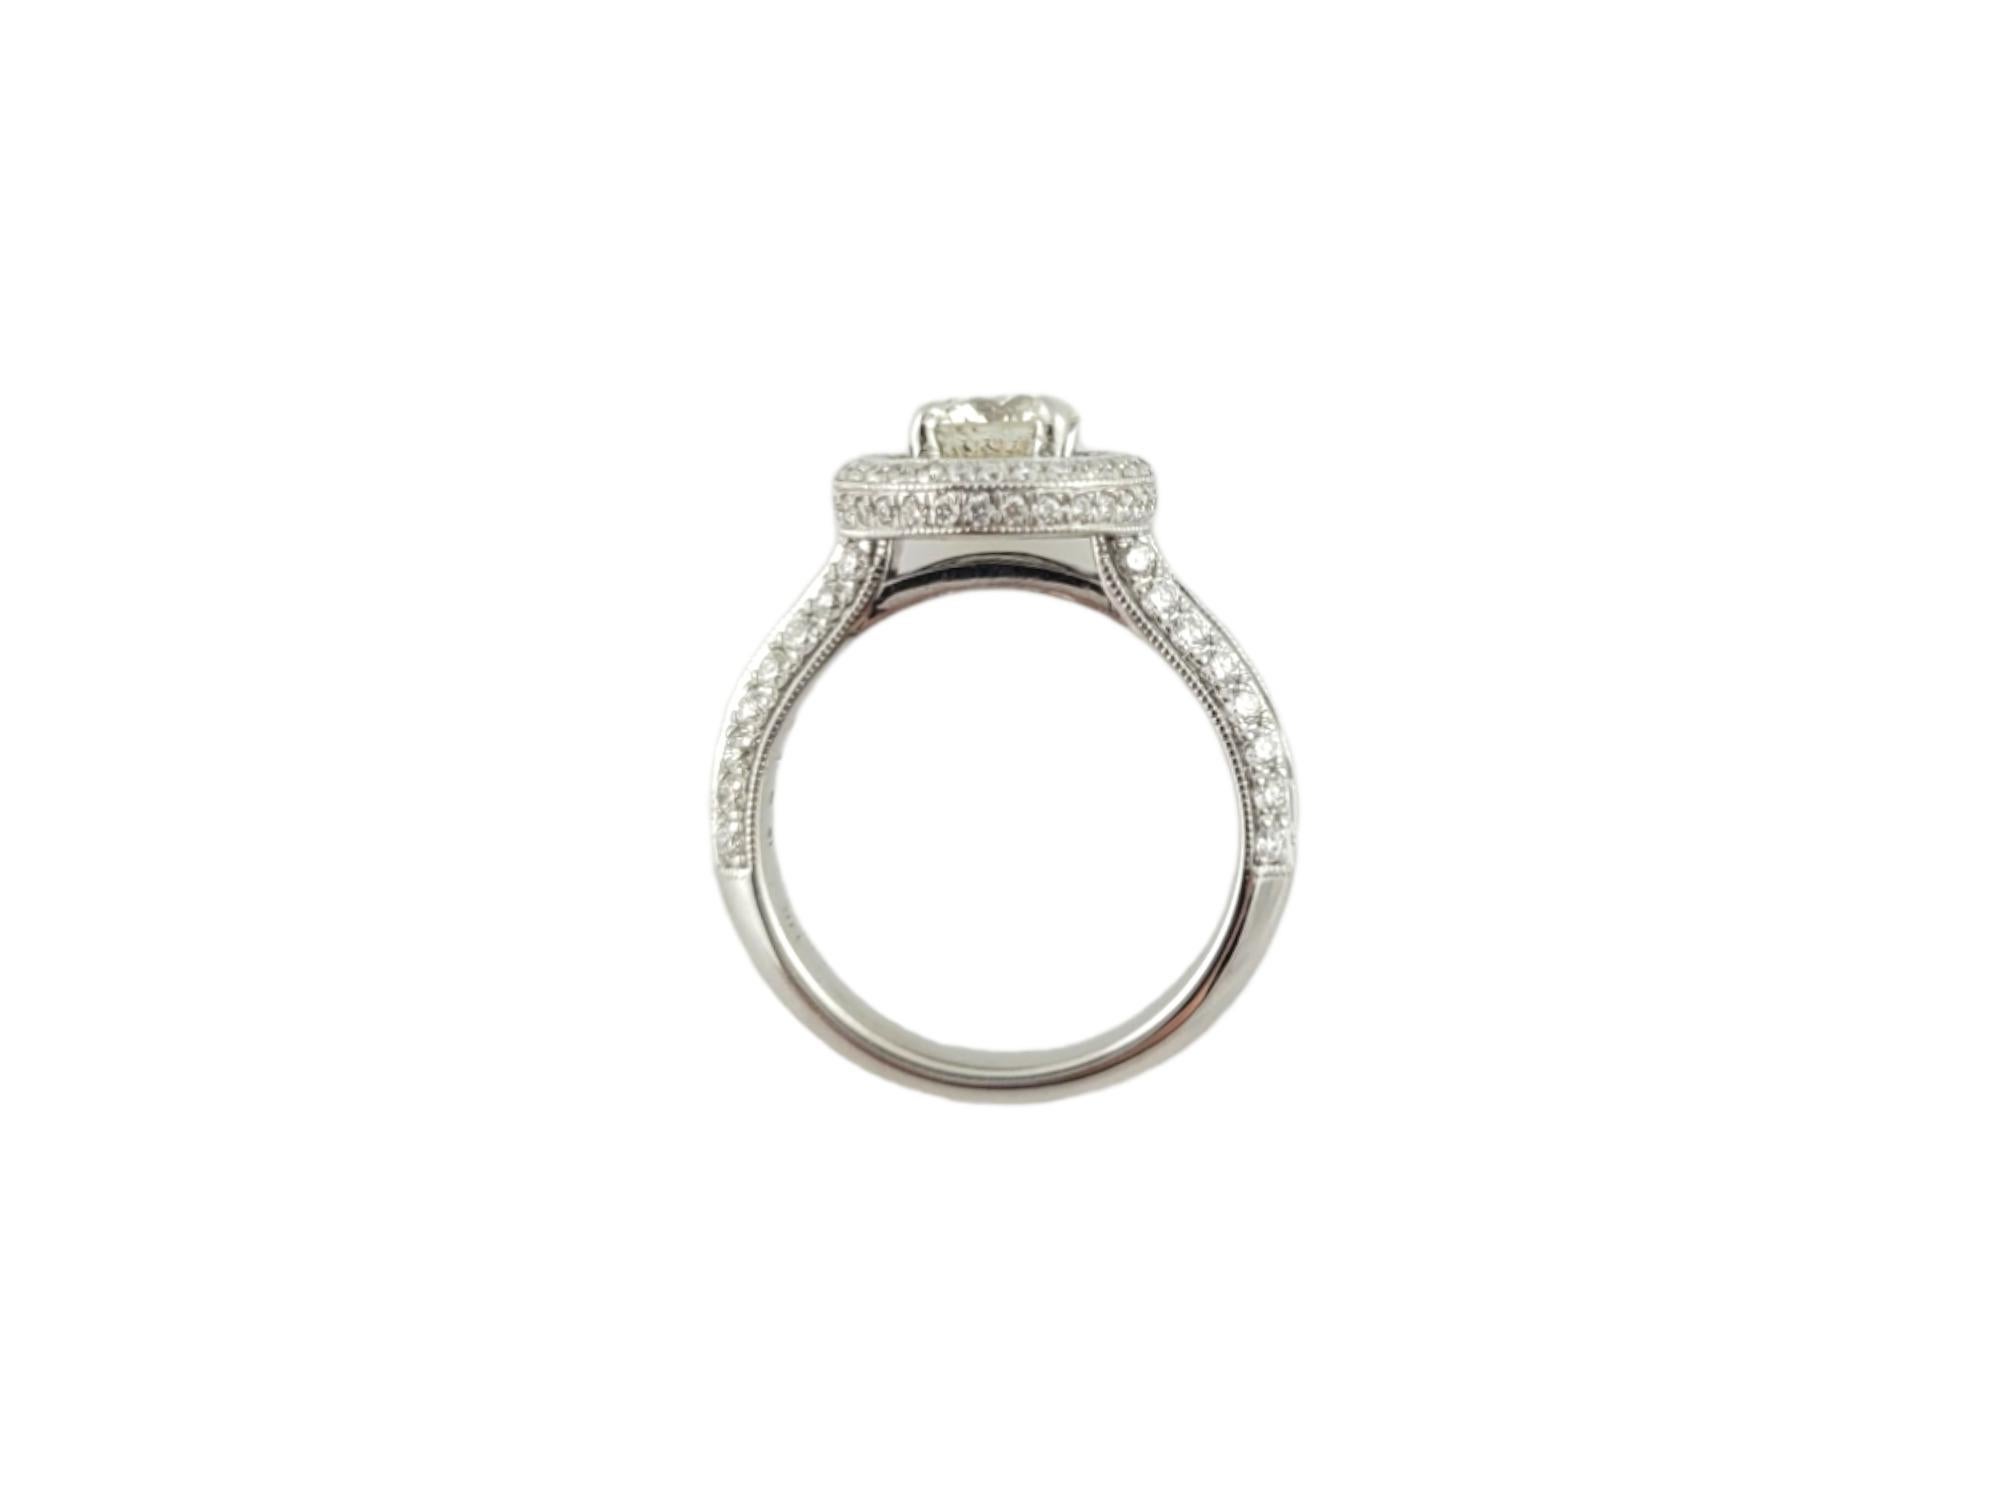 Vintage 14K White Gold Gabriel & Co. Diamond Halo Engagement Ring 

This halo style diamond engagement ring is set in 14K white gold. 

Center diamond is approximately .68cts  and of I1 clarity and L color

Surrounding diamonds on halo and band